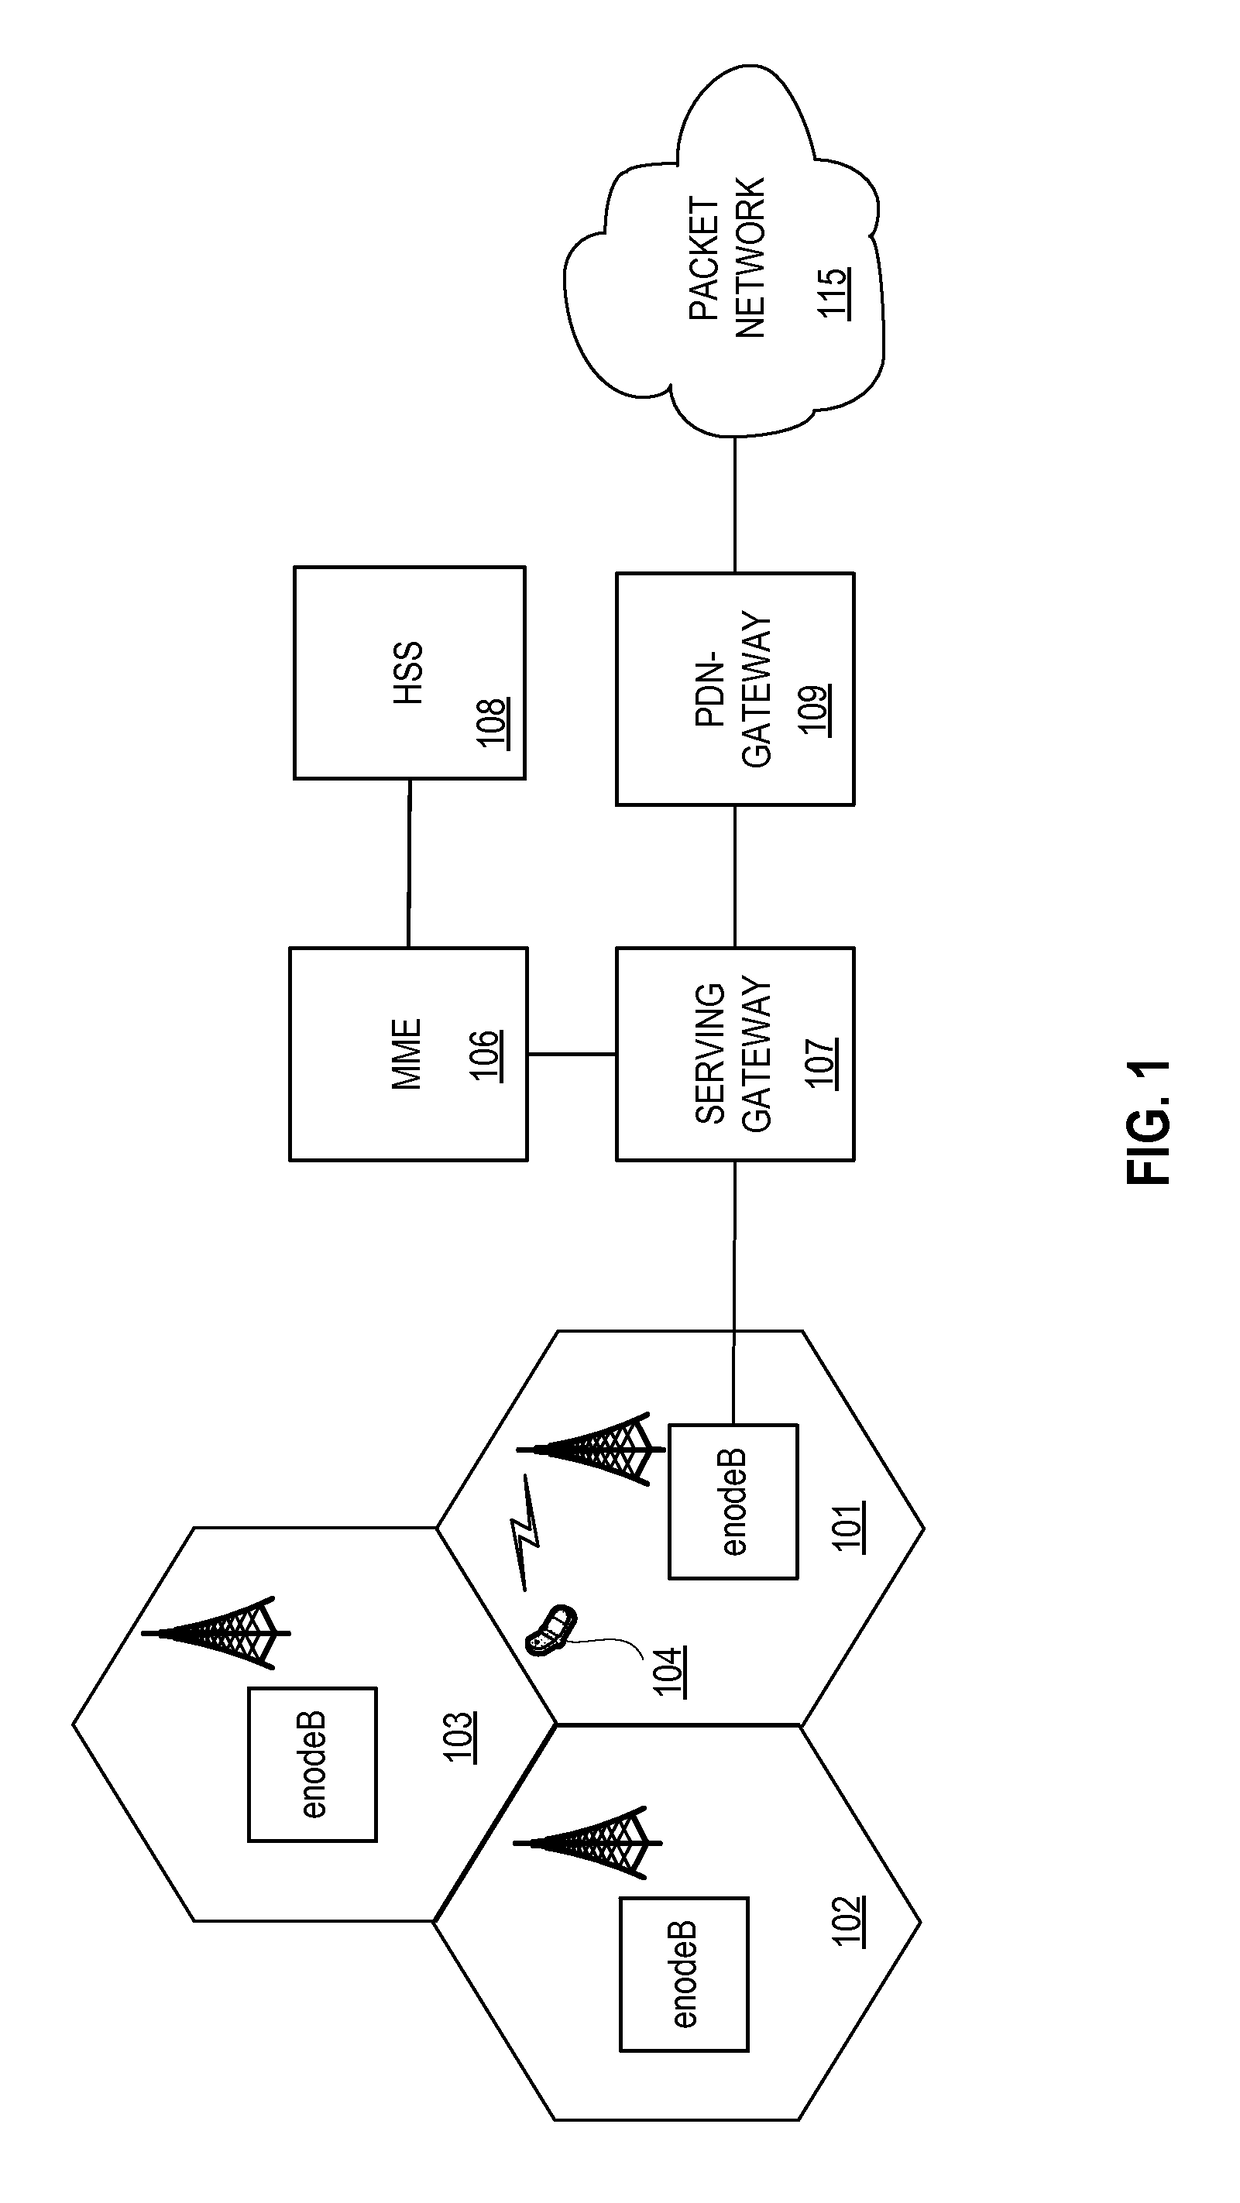 Mobility management of wireless networks based on multipath transfer control protocol